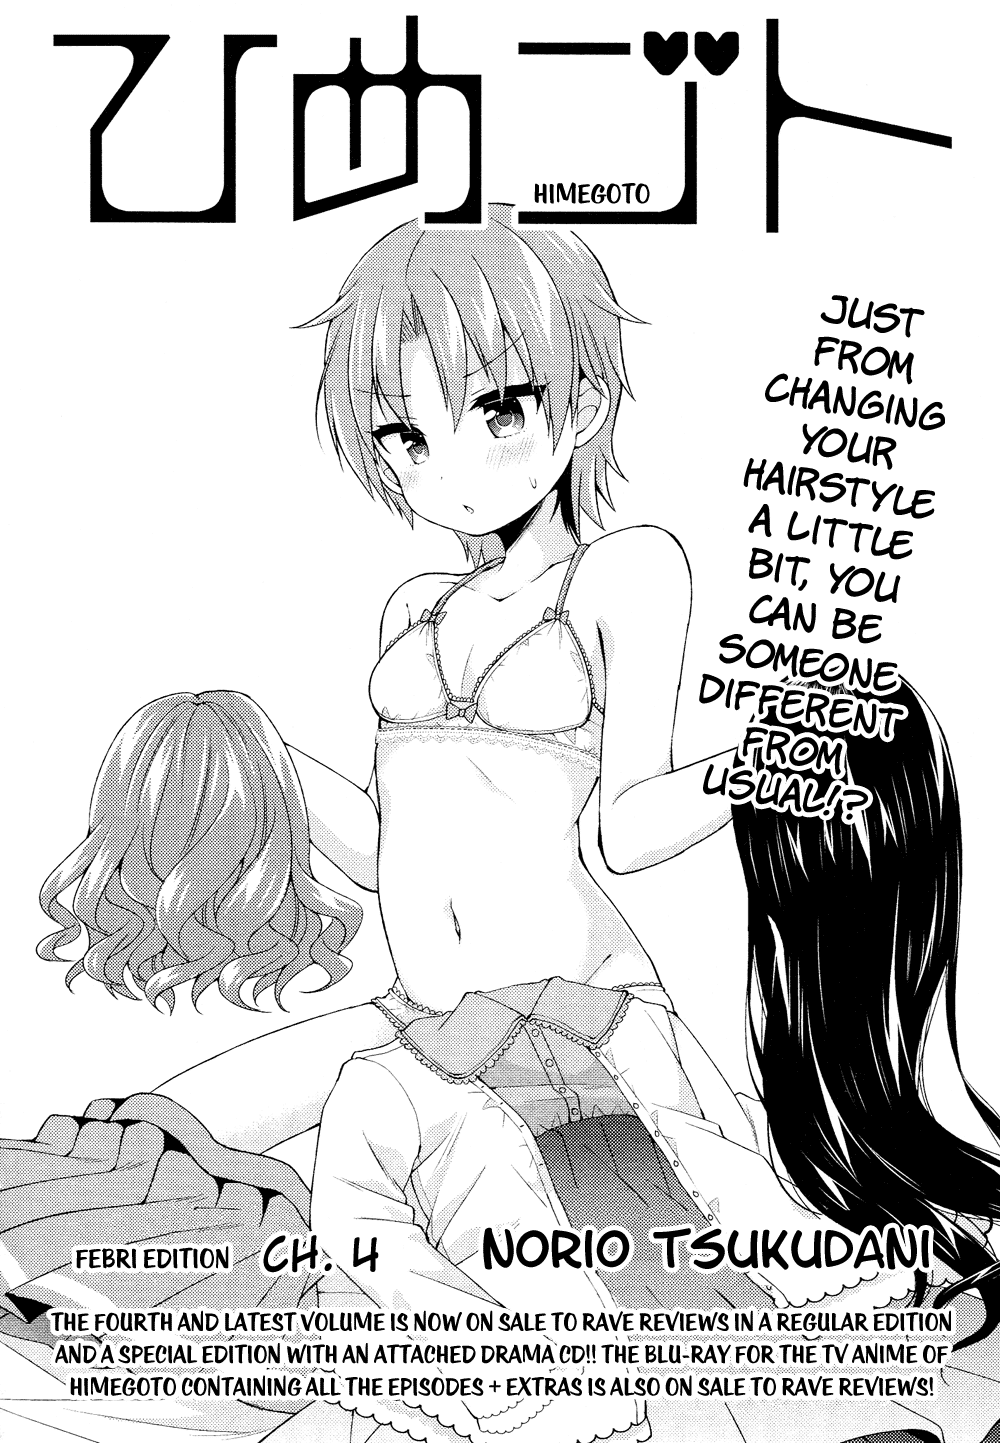 We said it was short, and that's why here's chapter 4 of Himegoto...